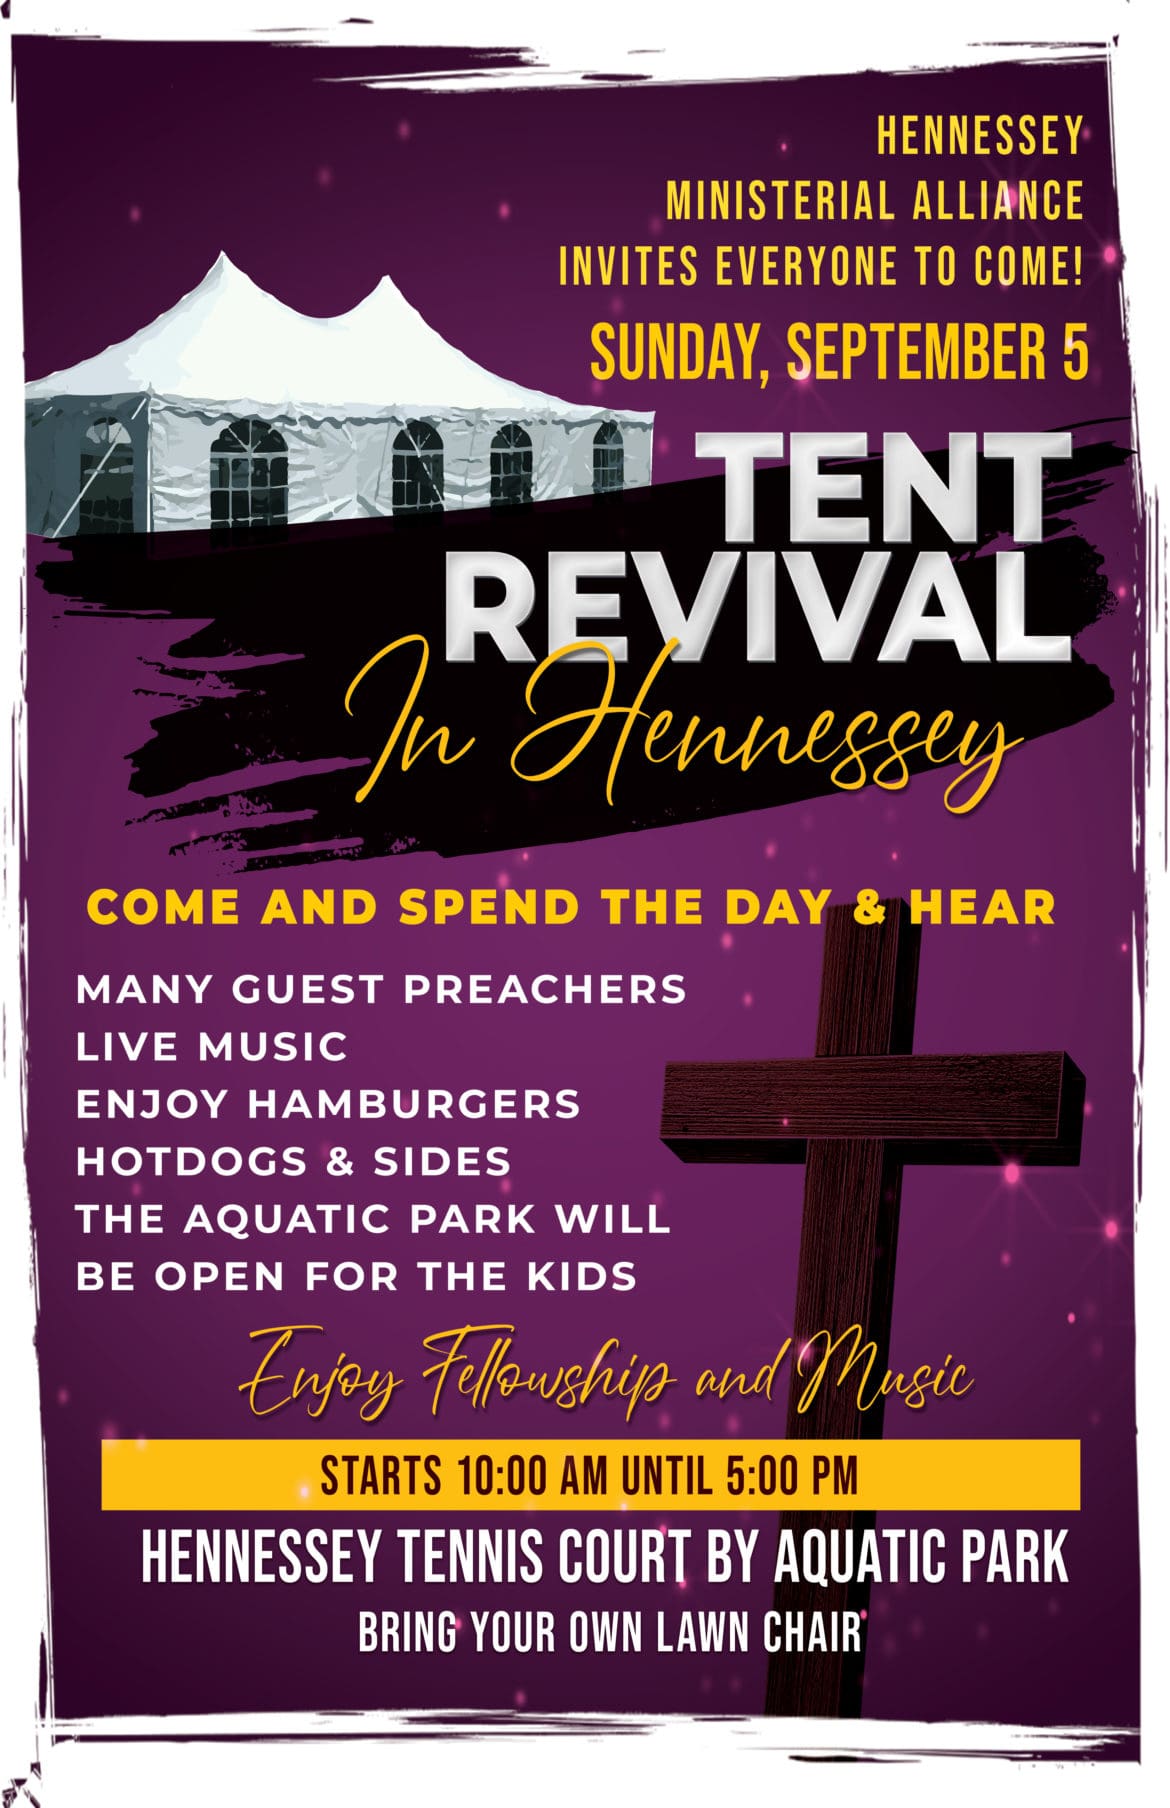 Tent Revival in Hennessey Sept. 5